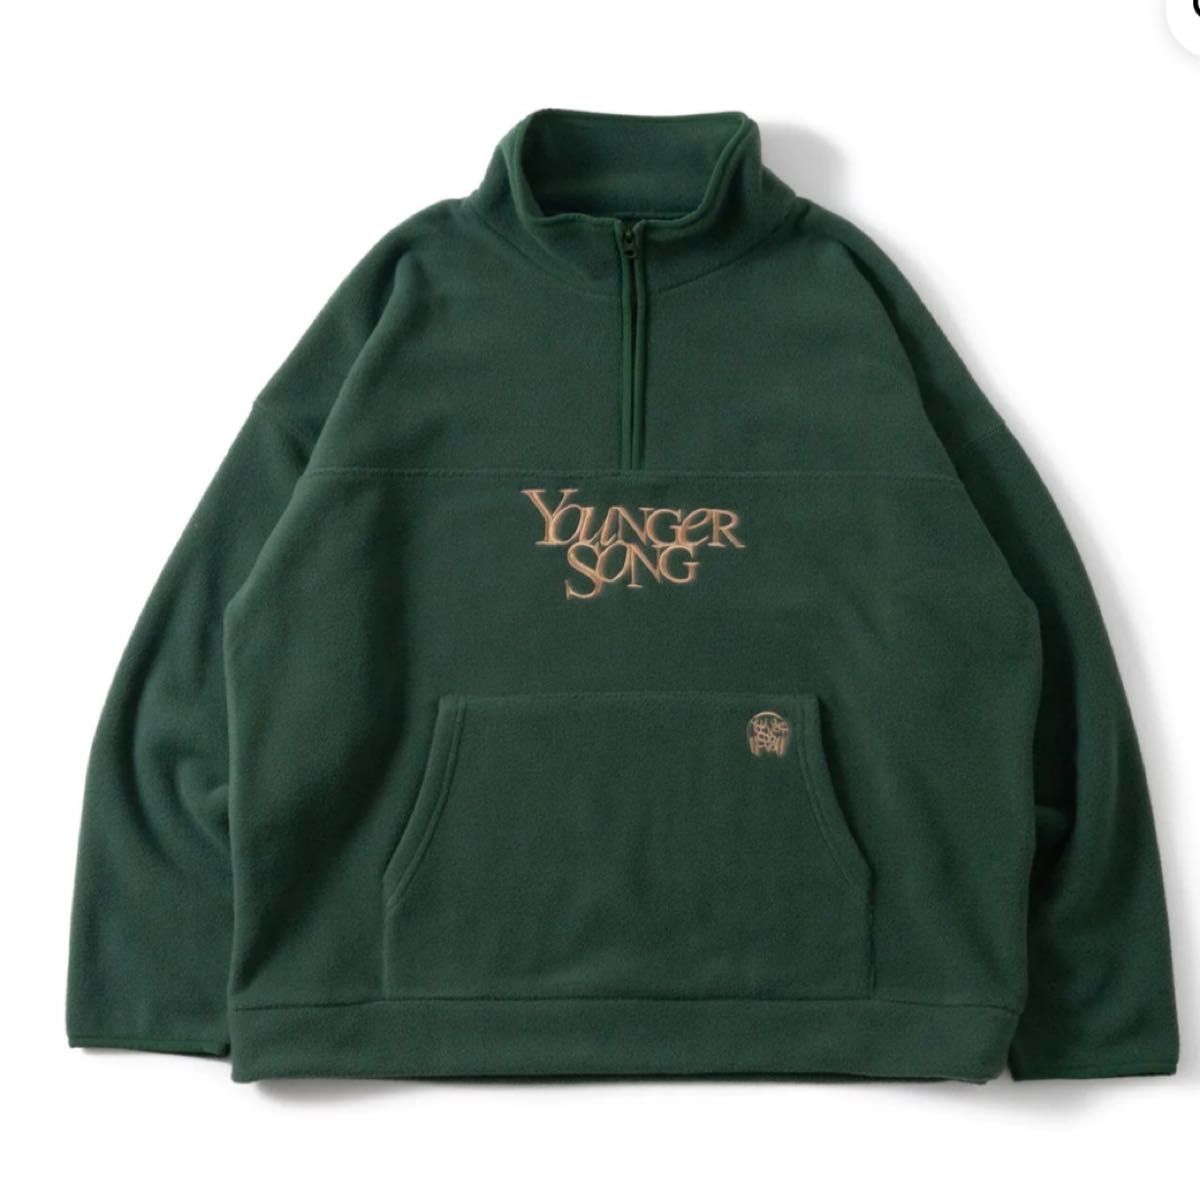 younger song fleece anorak green color｜PayPayフリマ